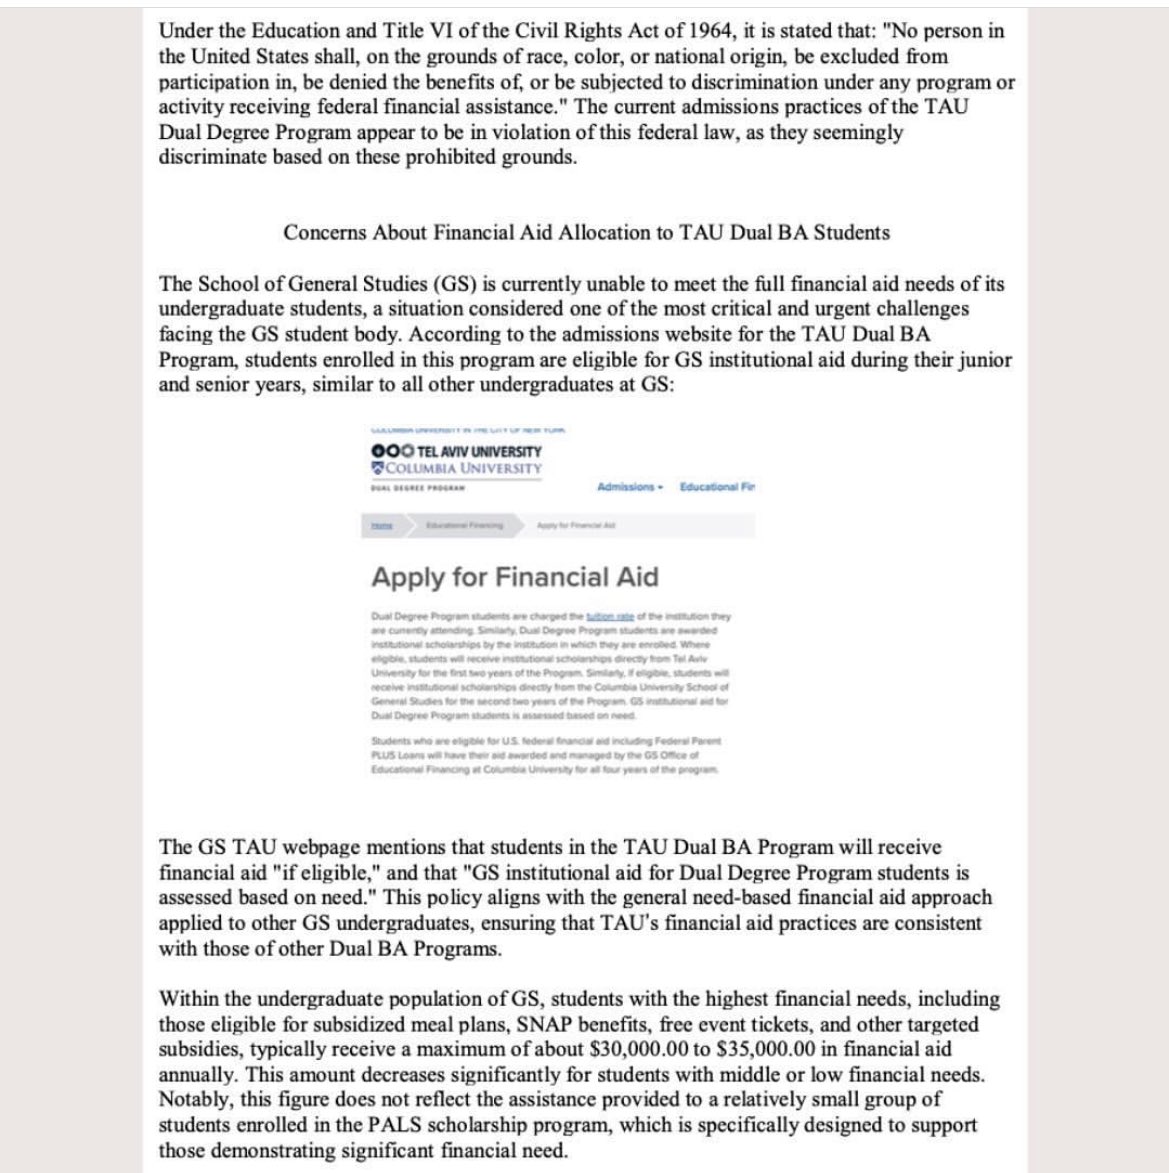 BREAKING: LEAKED DOCUMENT from Columbia University admin detailing: 1. Discriminatory Admissions policies for the Tel Aviv Dual Degree program 2. Disproportionate financial aid given to Tel Aviv Dual Degree Students 3. Bias from the Dean of General Studies Thread 🧵